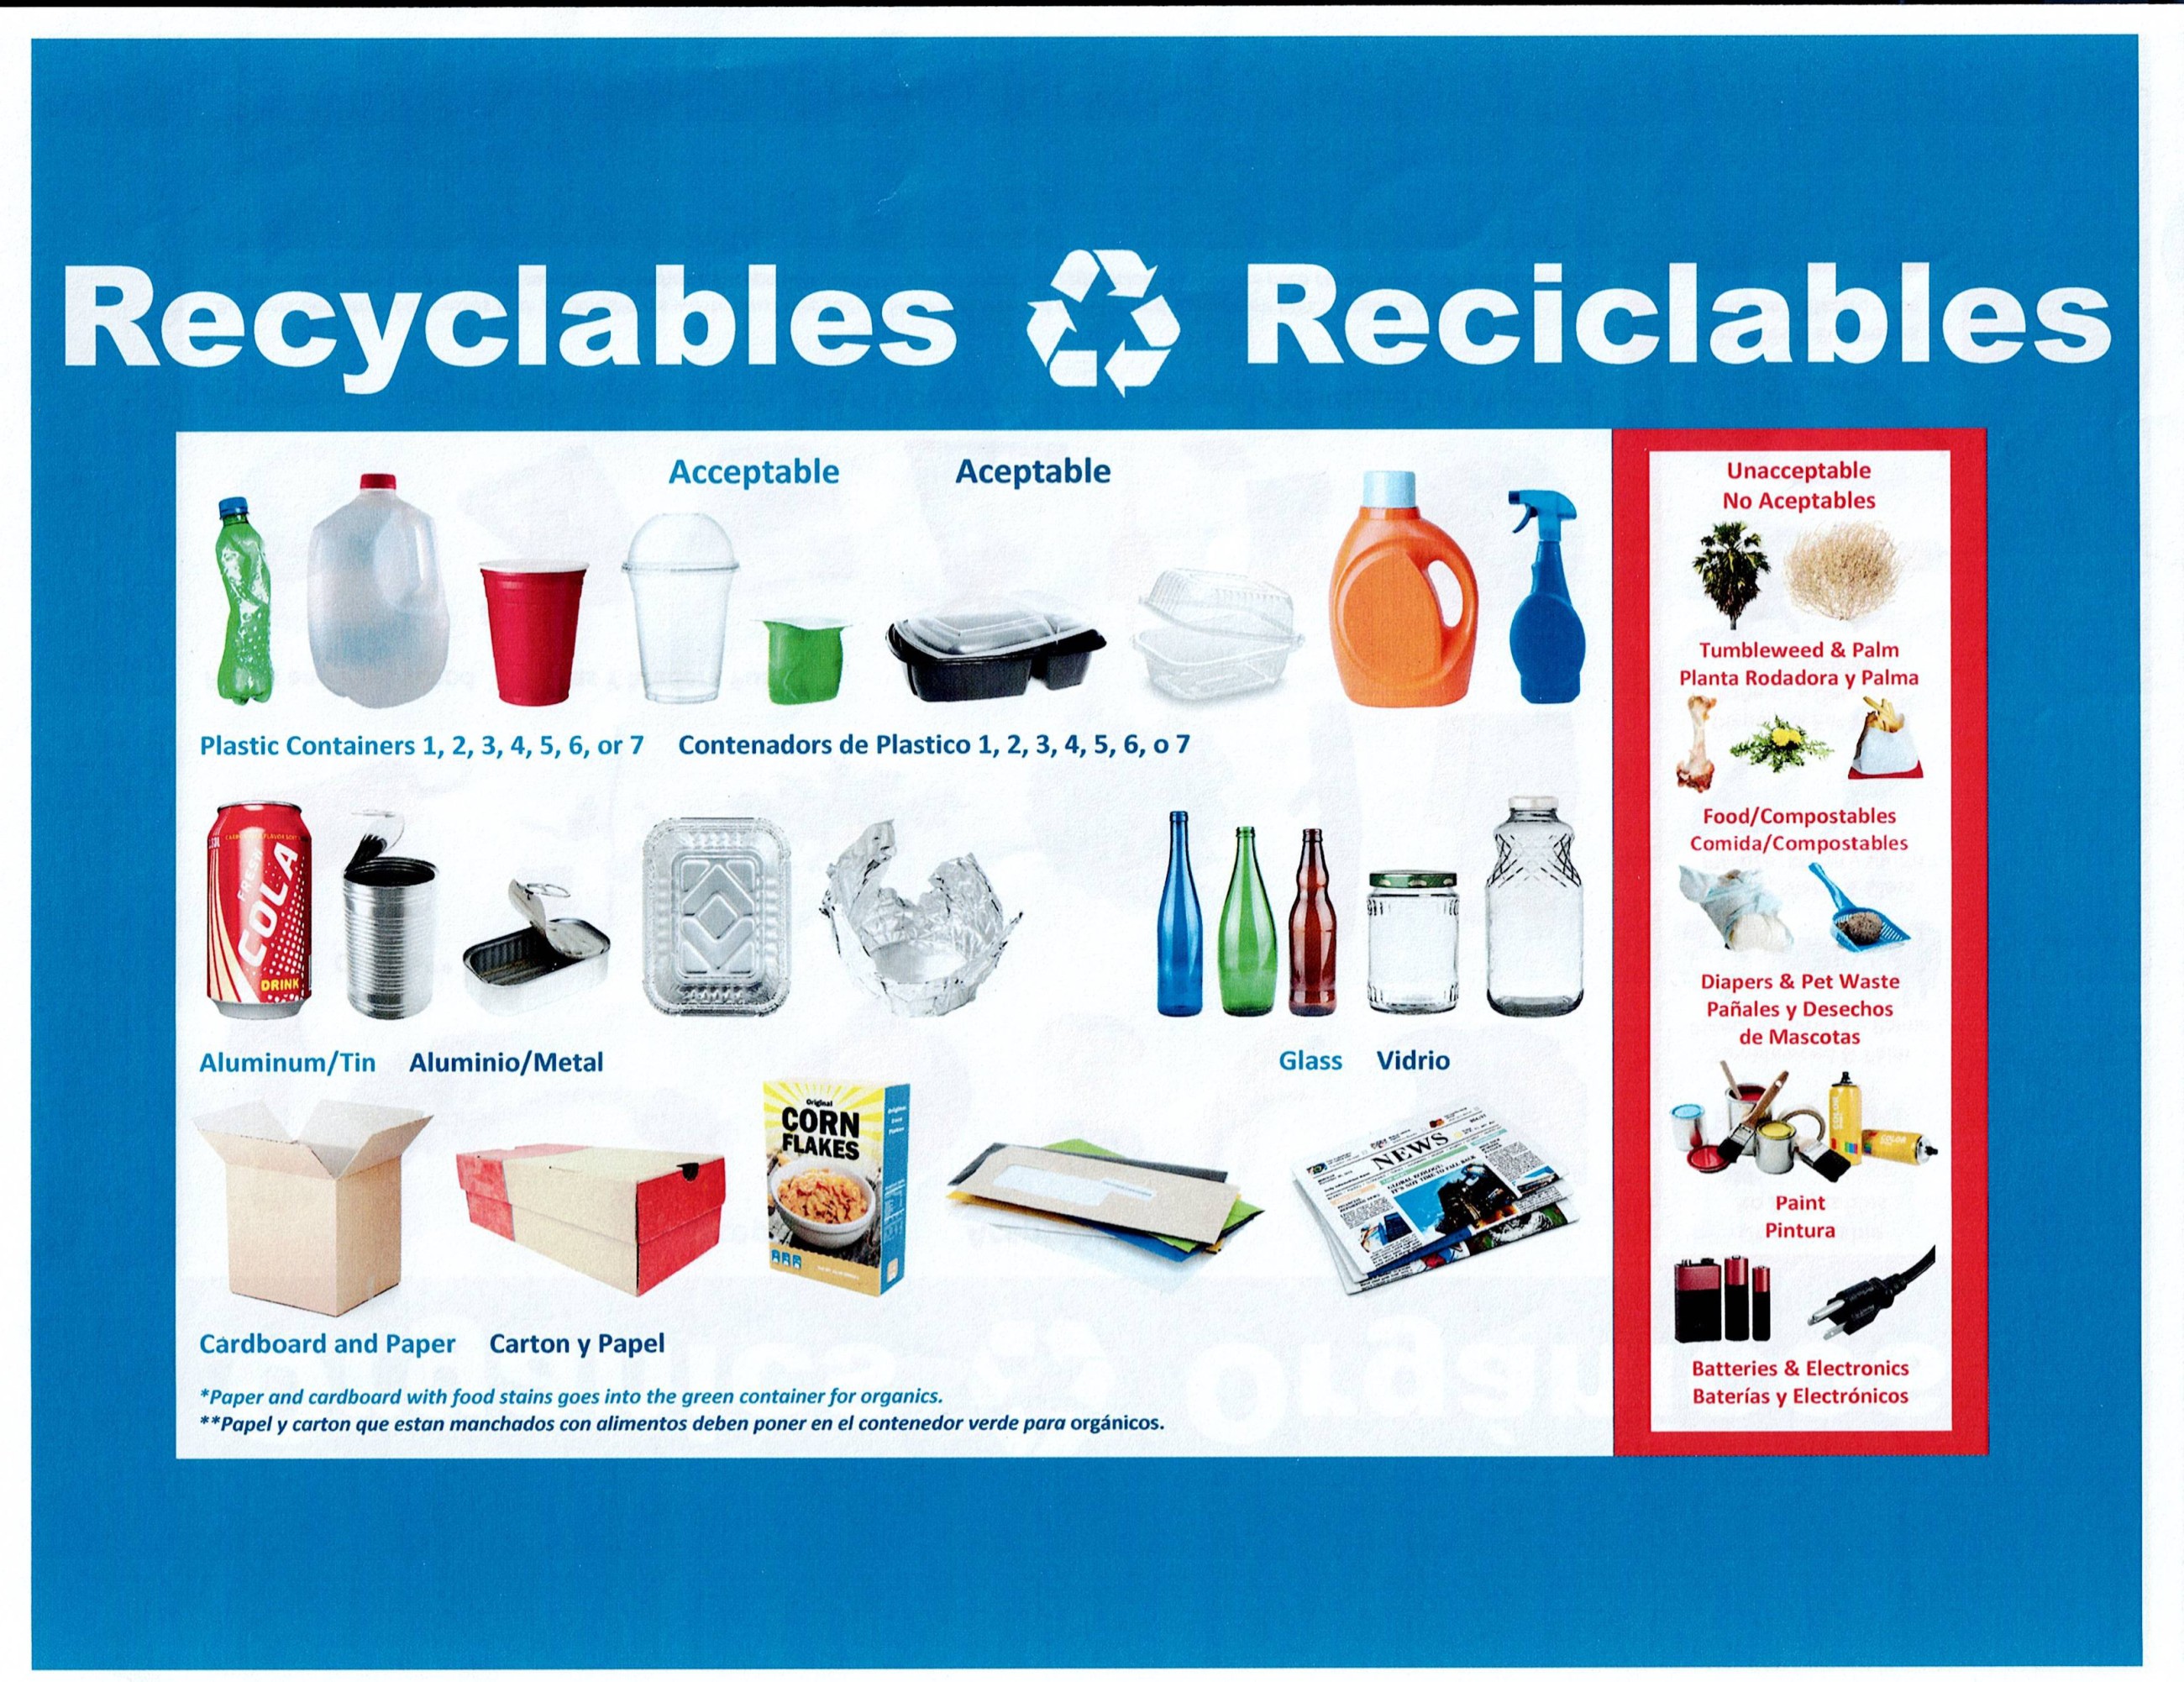 Recyclables